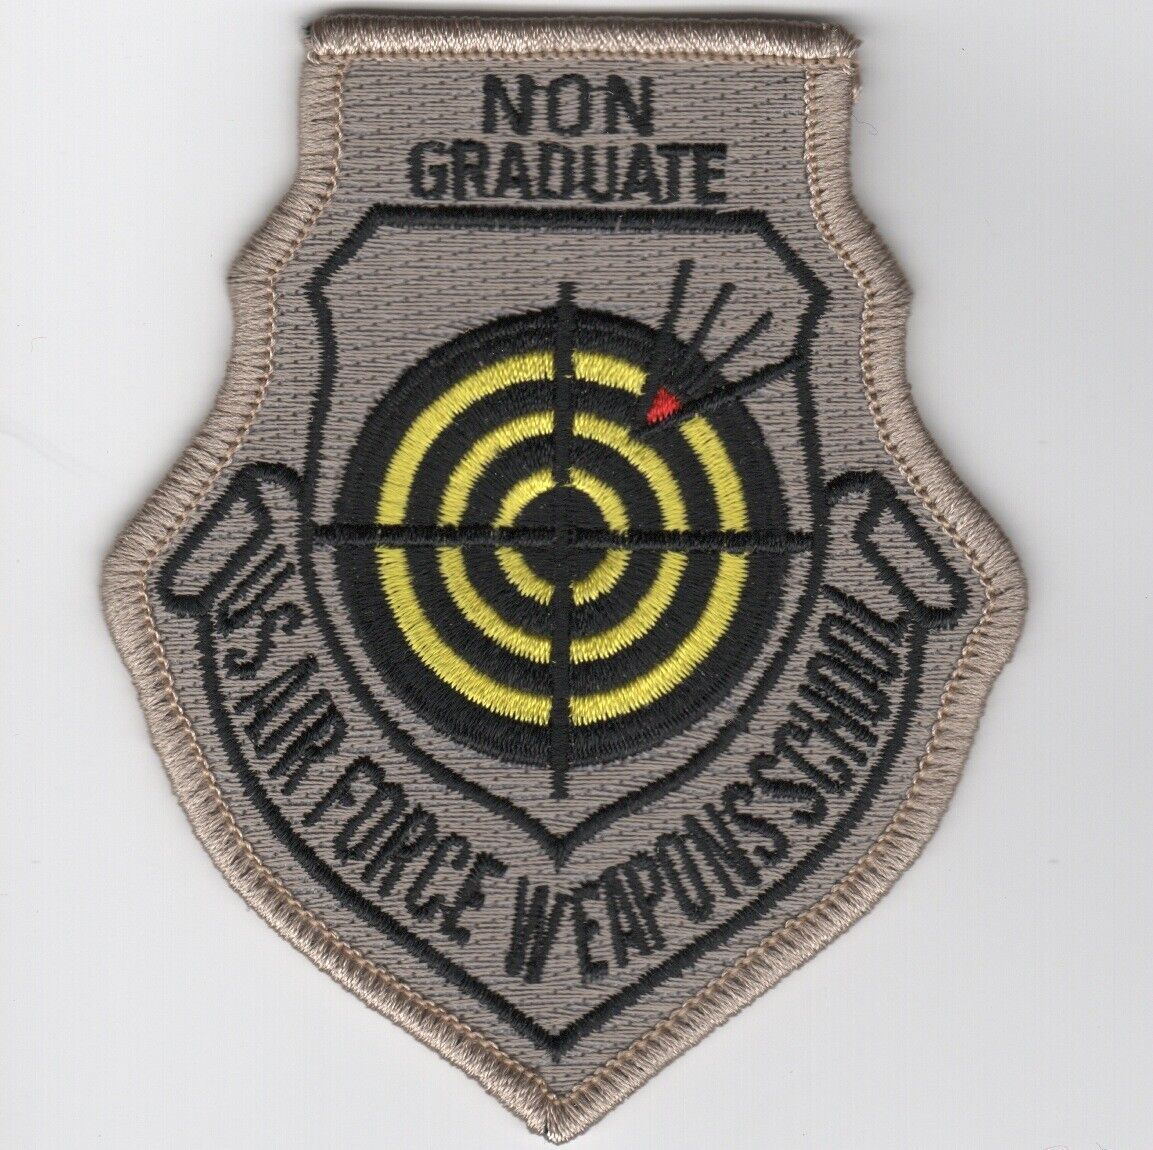 USAF AIR FORCE WIC FIGHTER WEAPONS SCHOOL NON GRADUATE EMBROIDERED JACKET PATCH